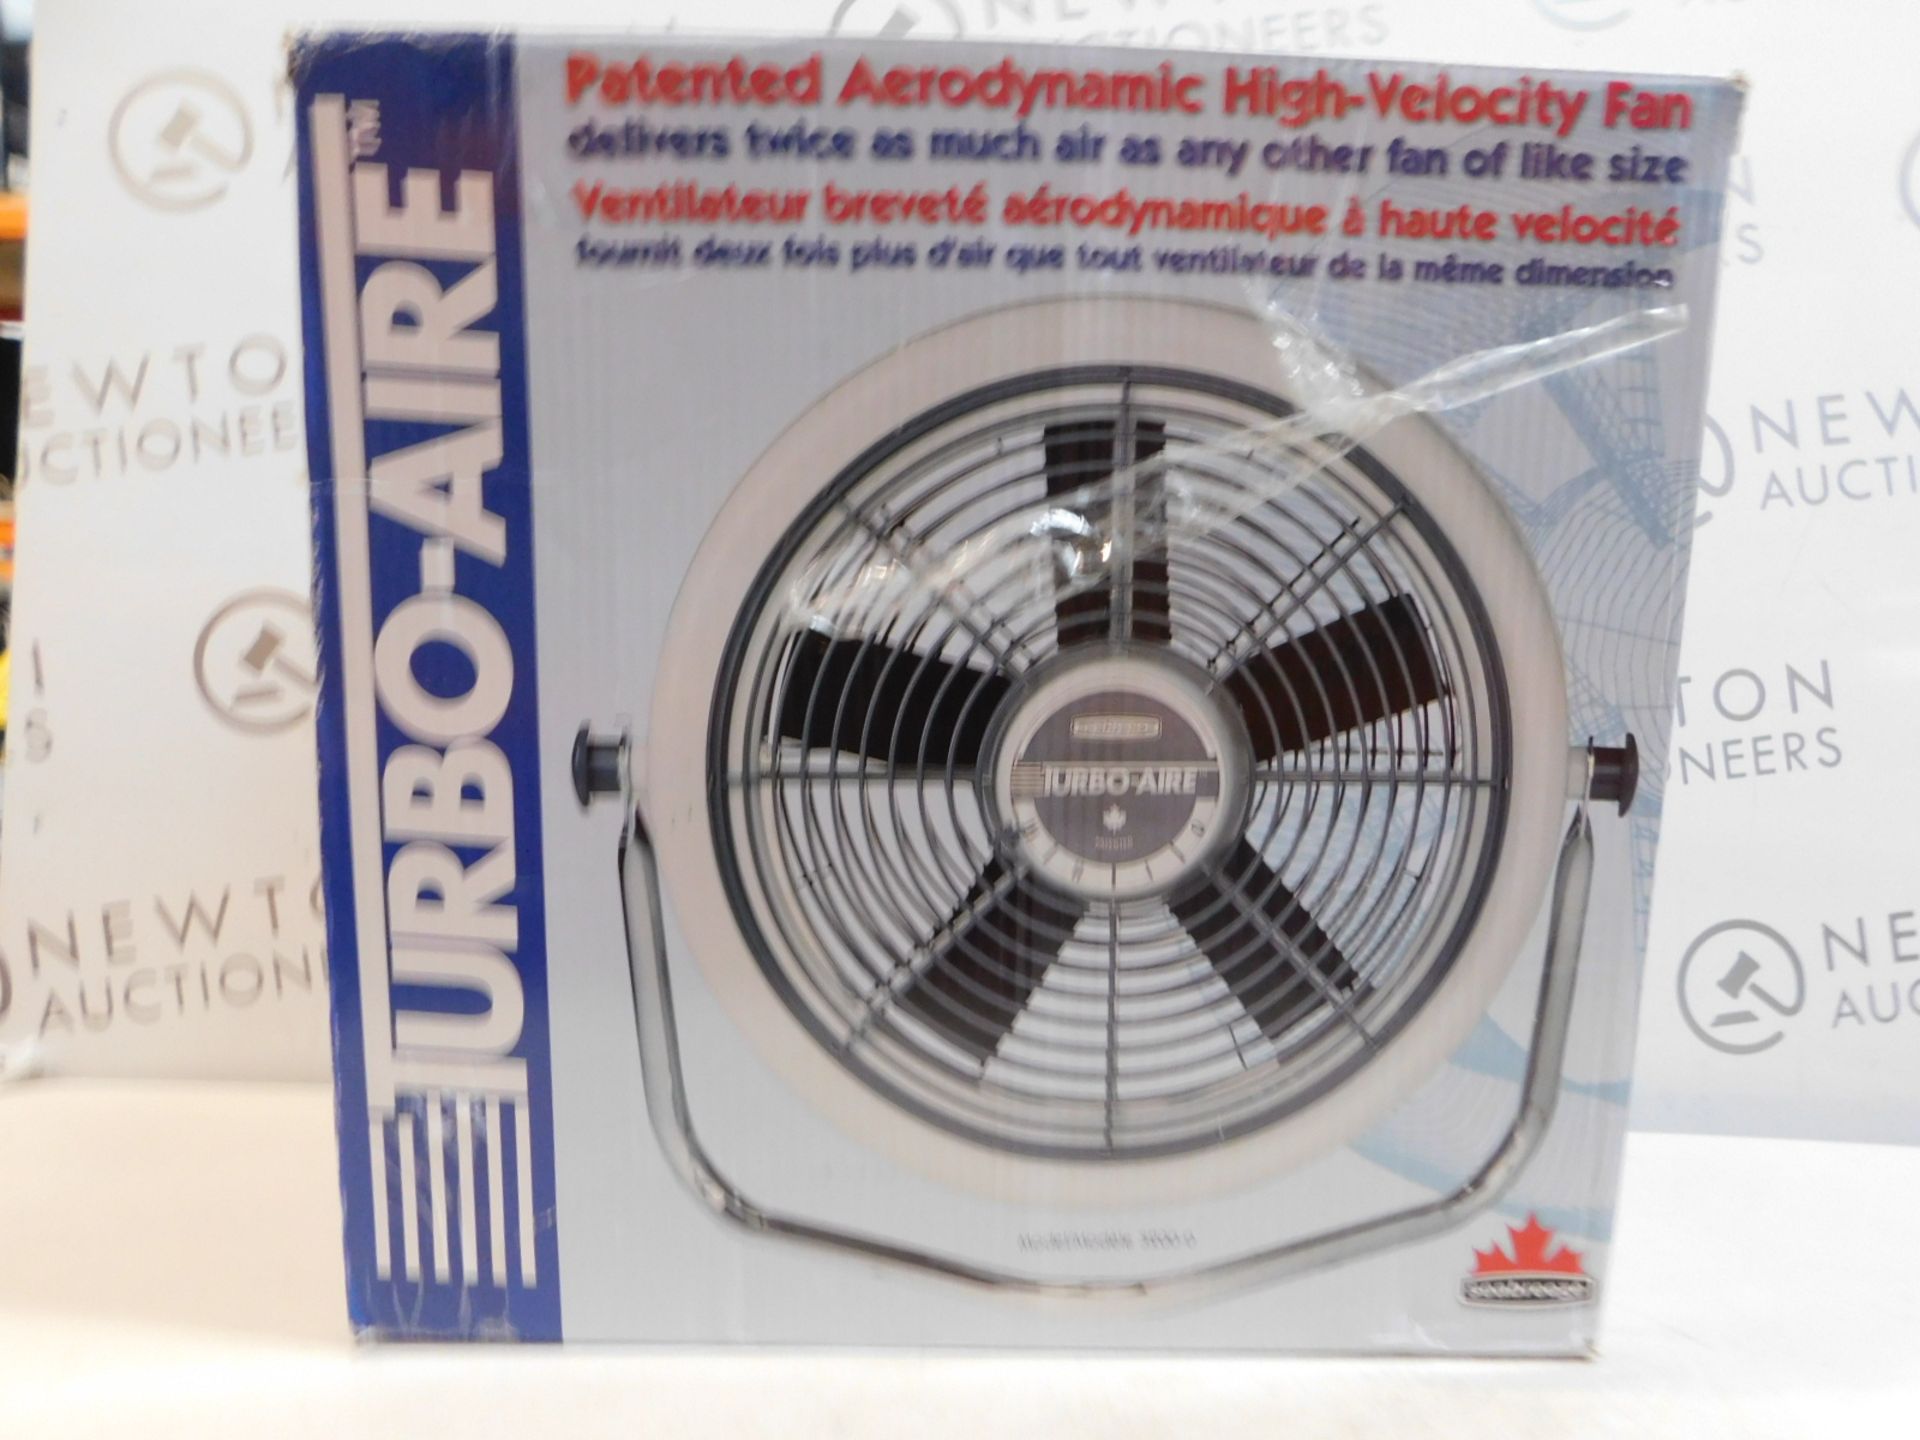 1 BOXED SEABREEZE TURBO-AIRE 3200-0 AERODYNAMIC HIGH VELOCITY 12" COOLING FAN RRP £119.99